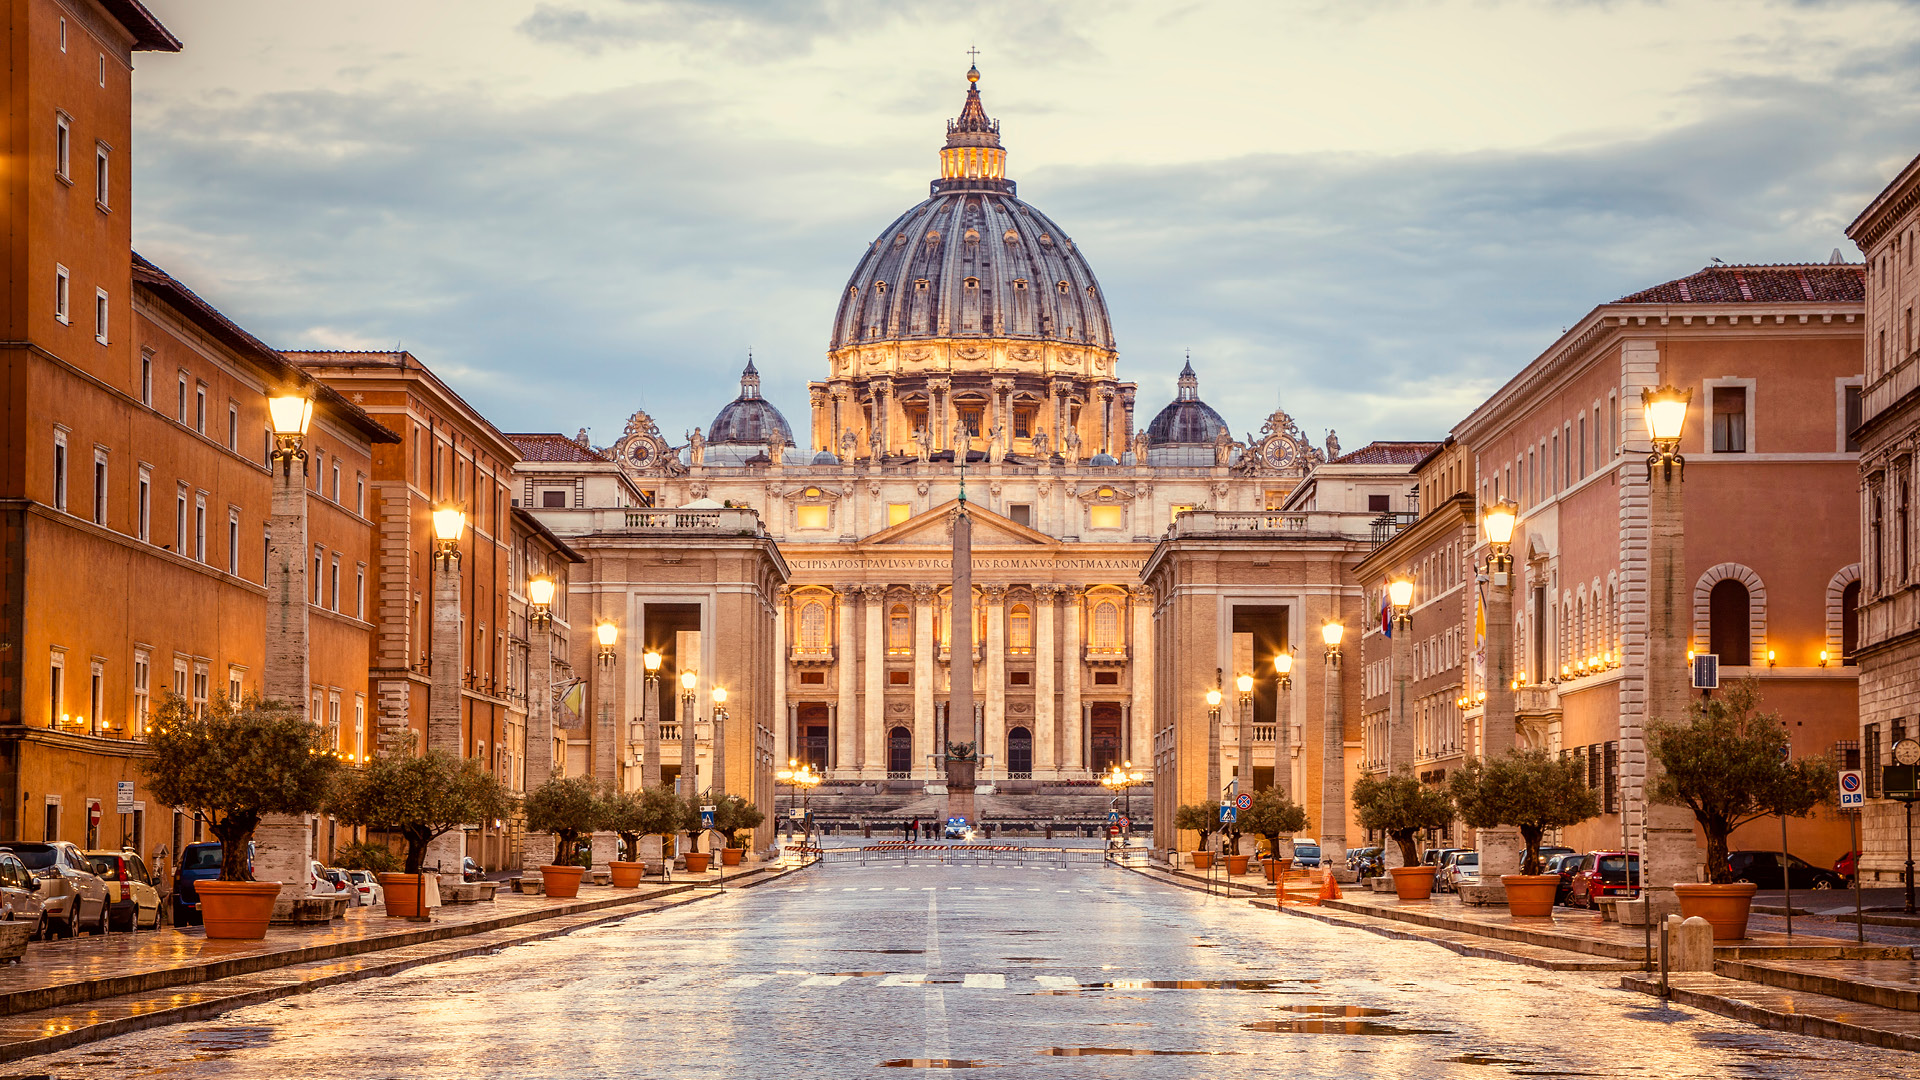 Michelangelo designed the dome of St. Peters Basilica on 